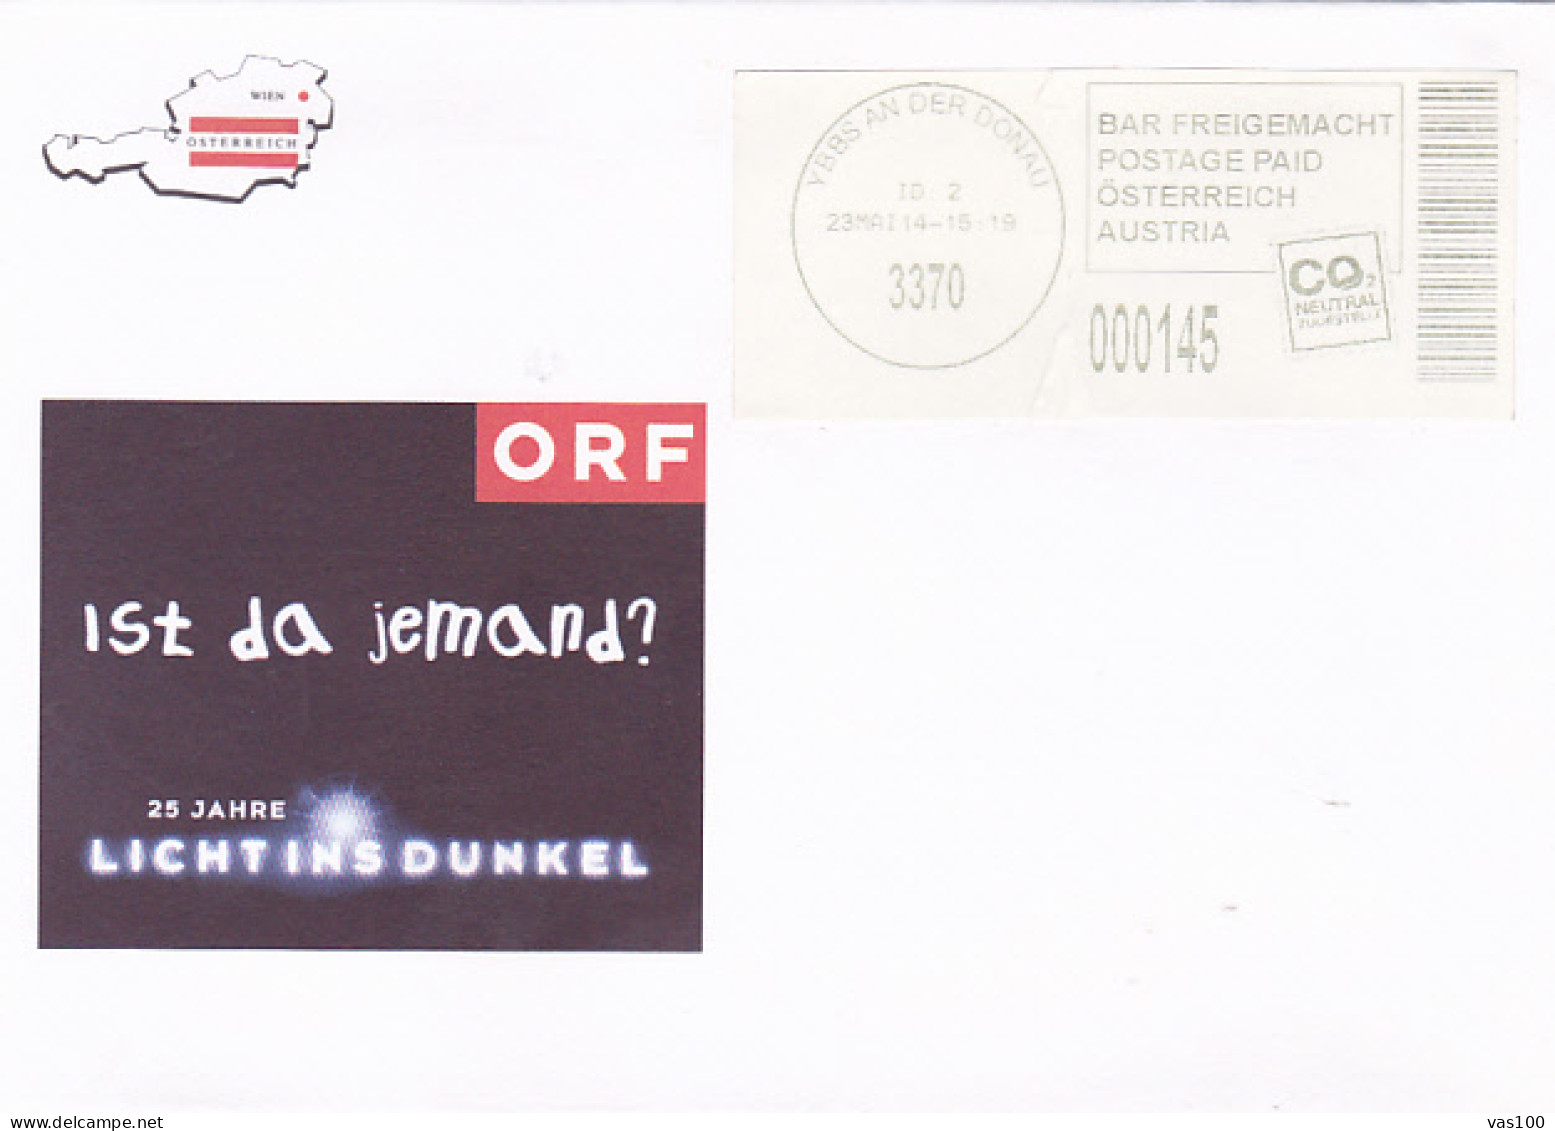 LIGHT IN THE DARK TELETHON ADVERTISING, POSTAGE PAID SPECIAL COVER, 2014, AUSTRIA - Lettres & Documents